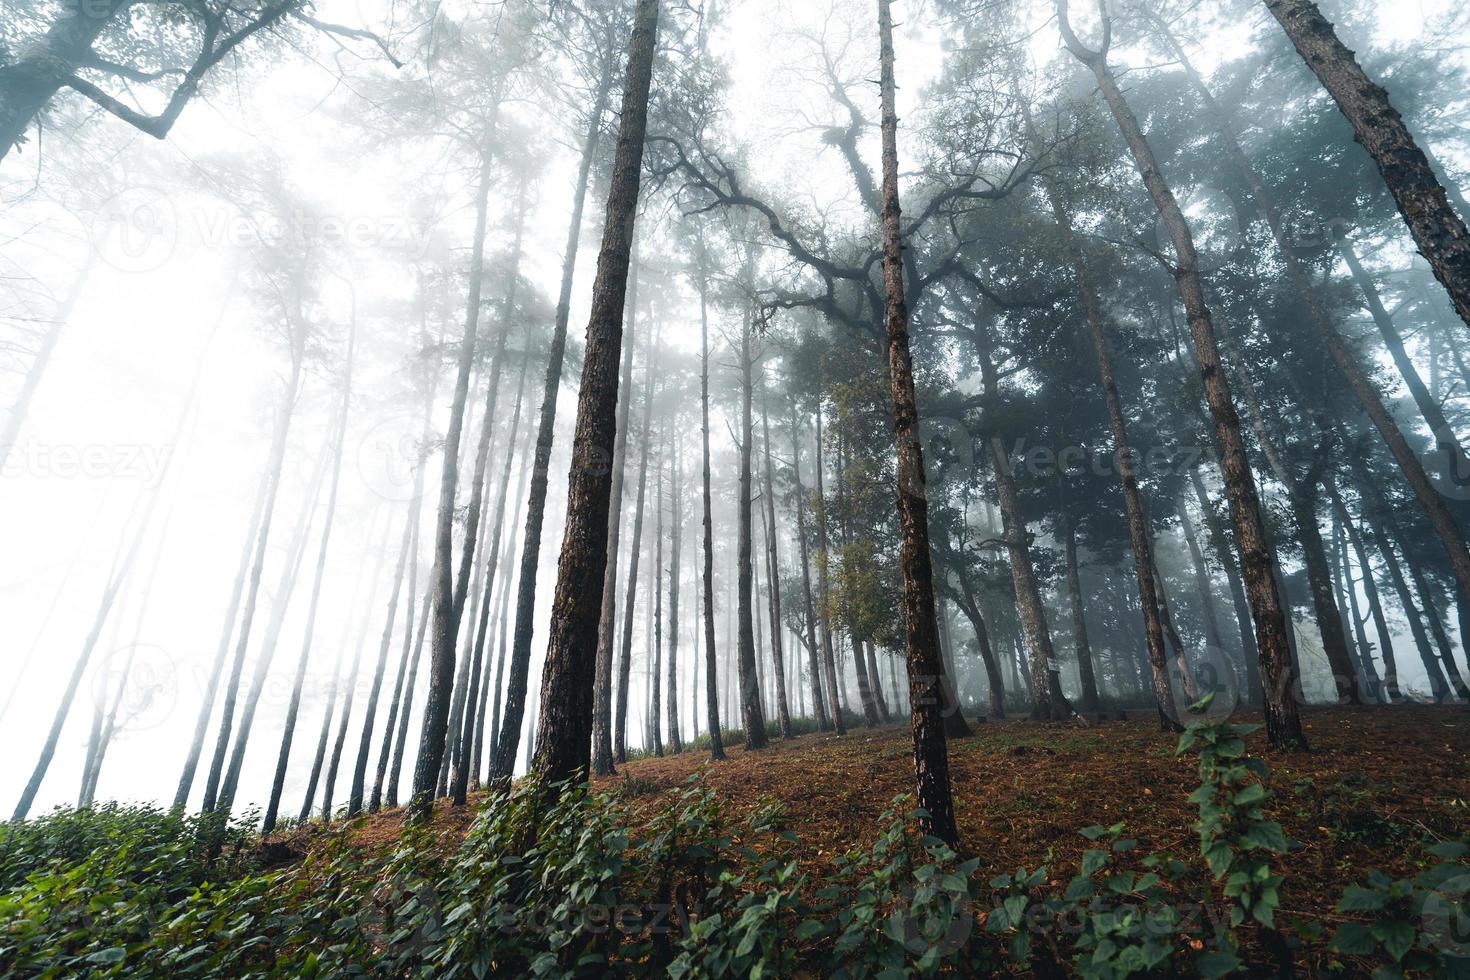 misty forest and pine trees photo